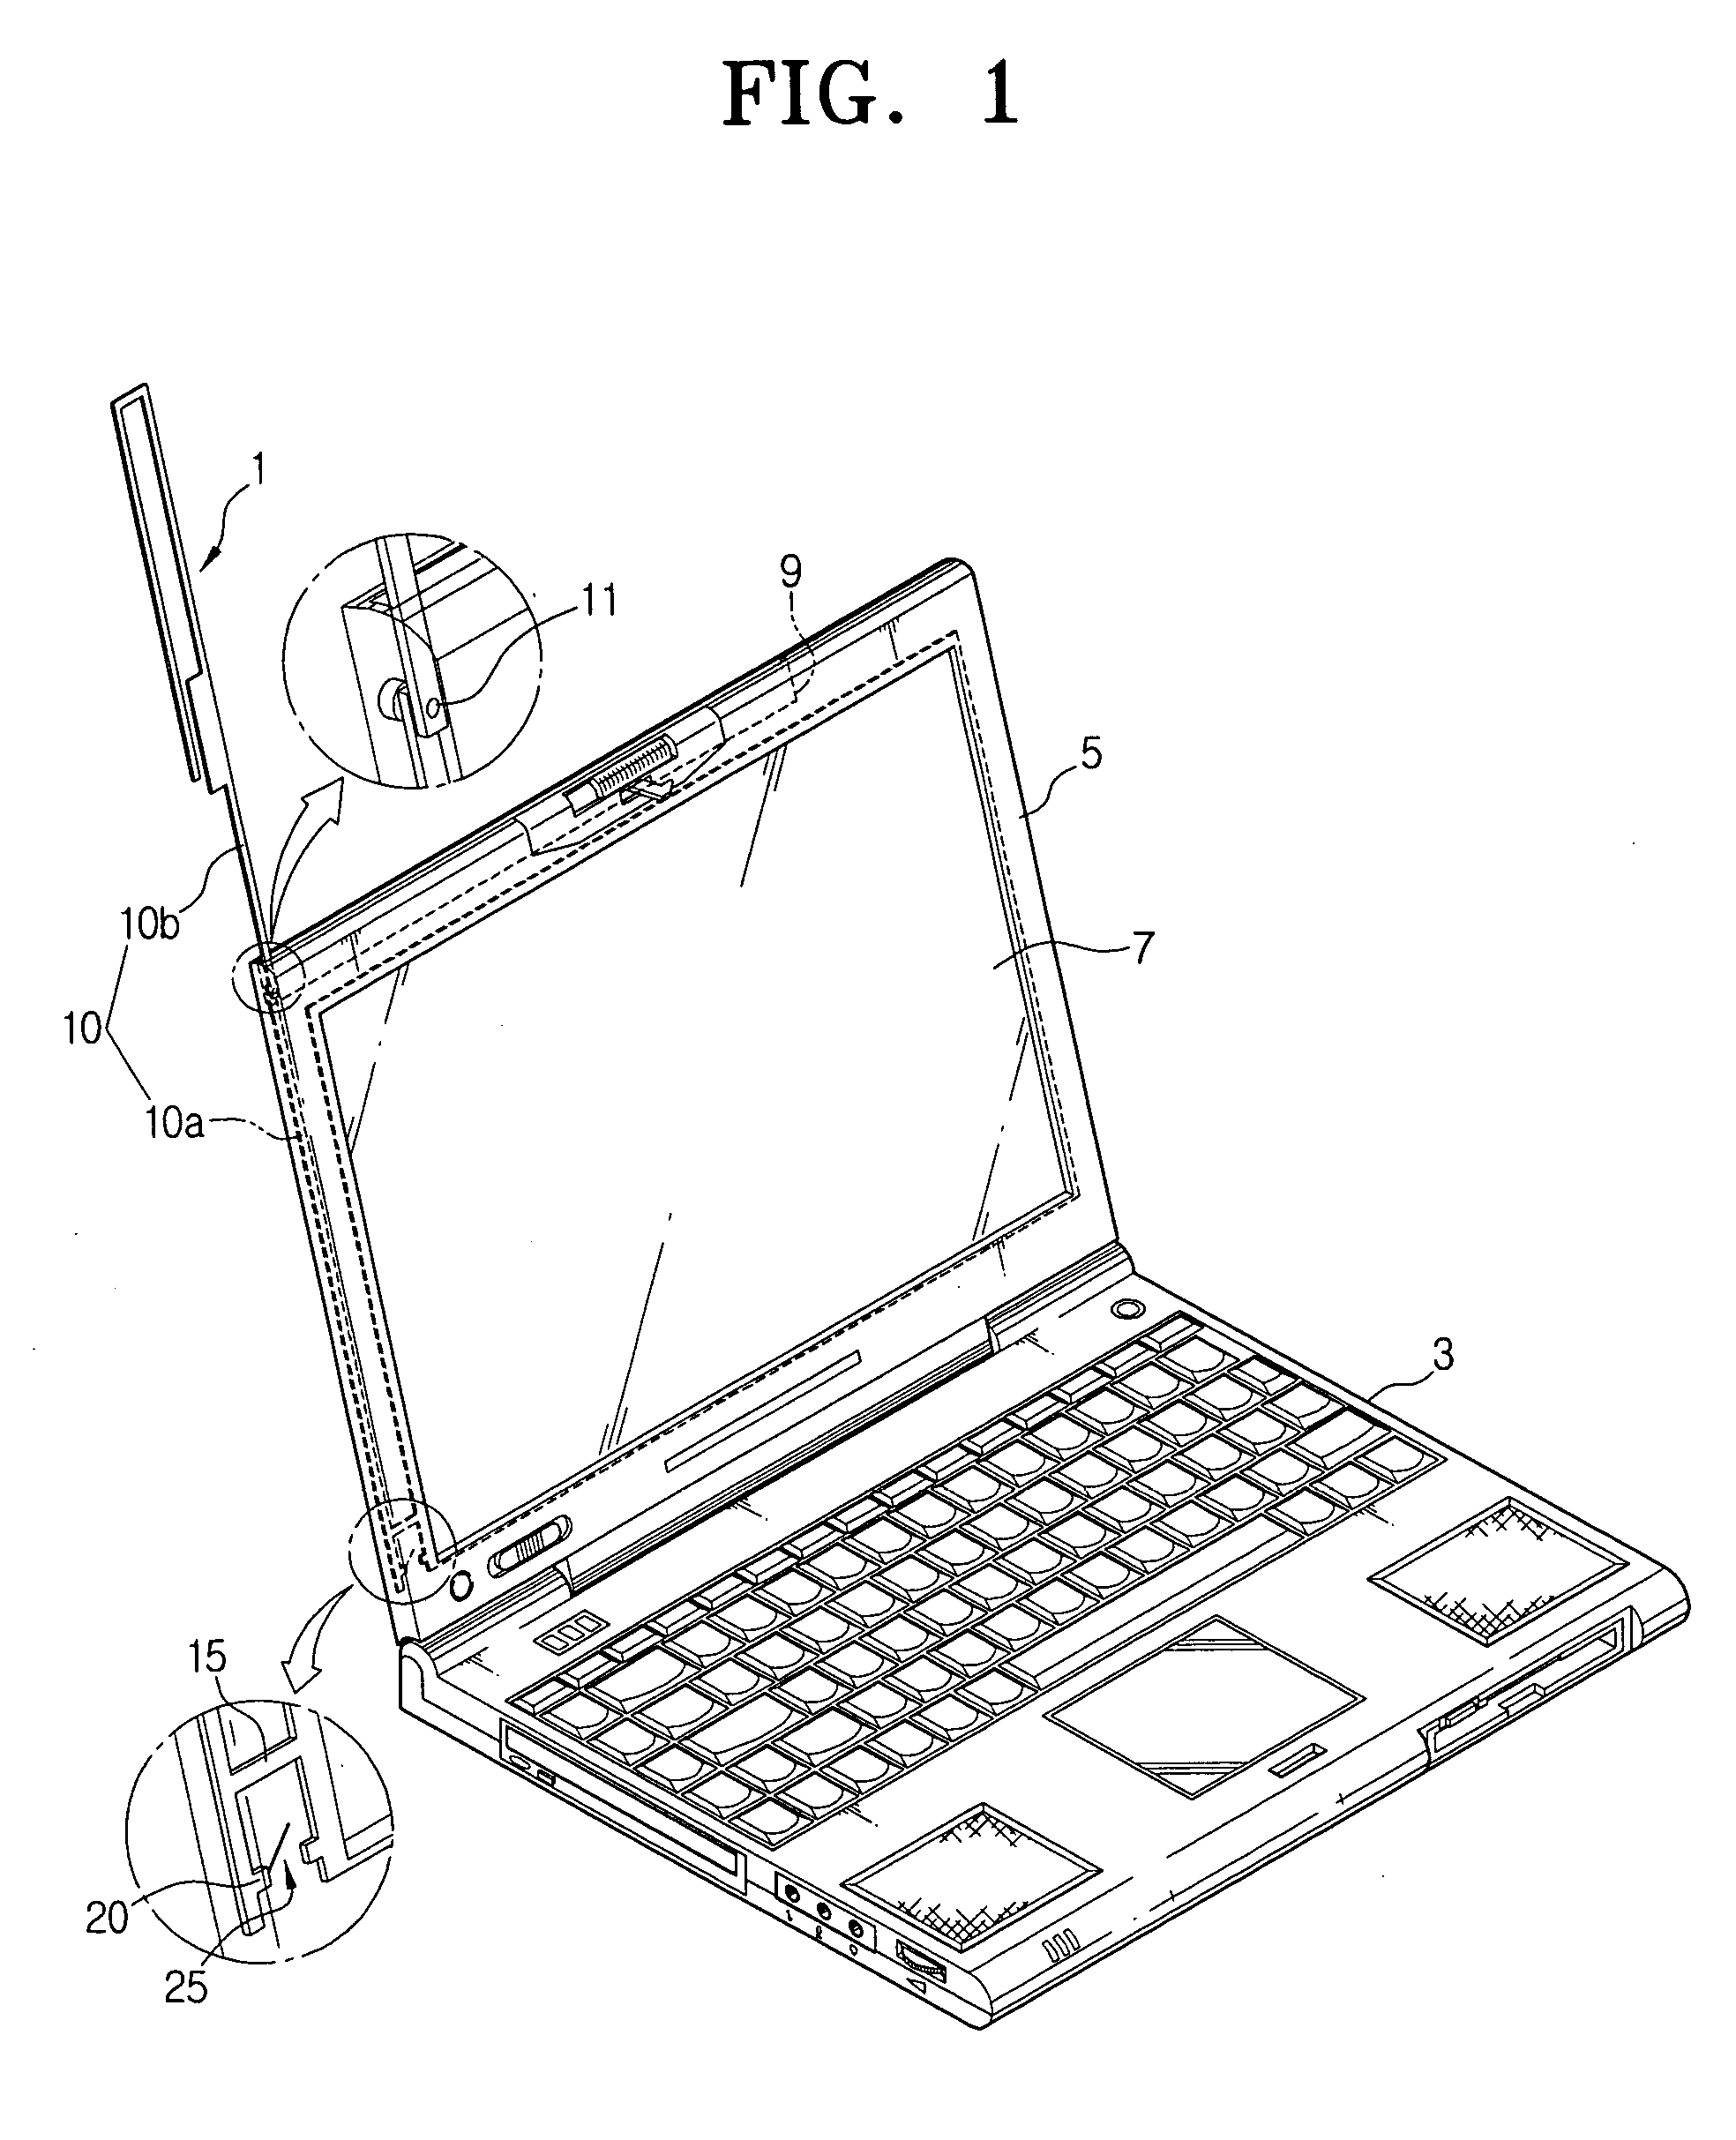 Broadcasting receiving antenna system mounted in a wireless terminal